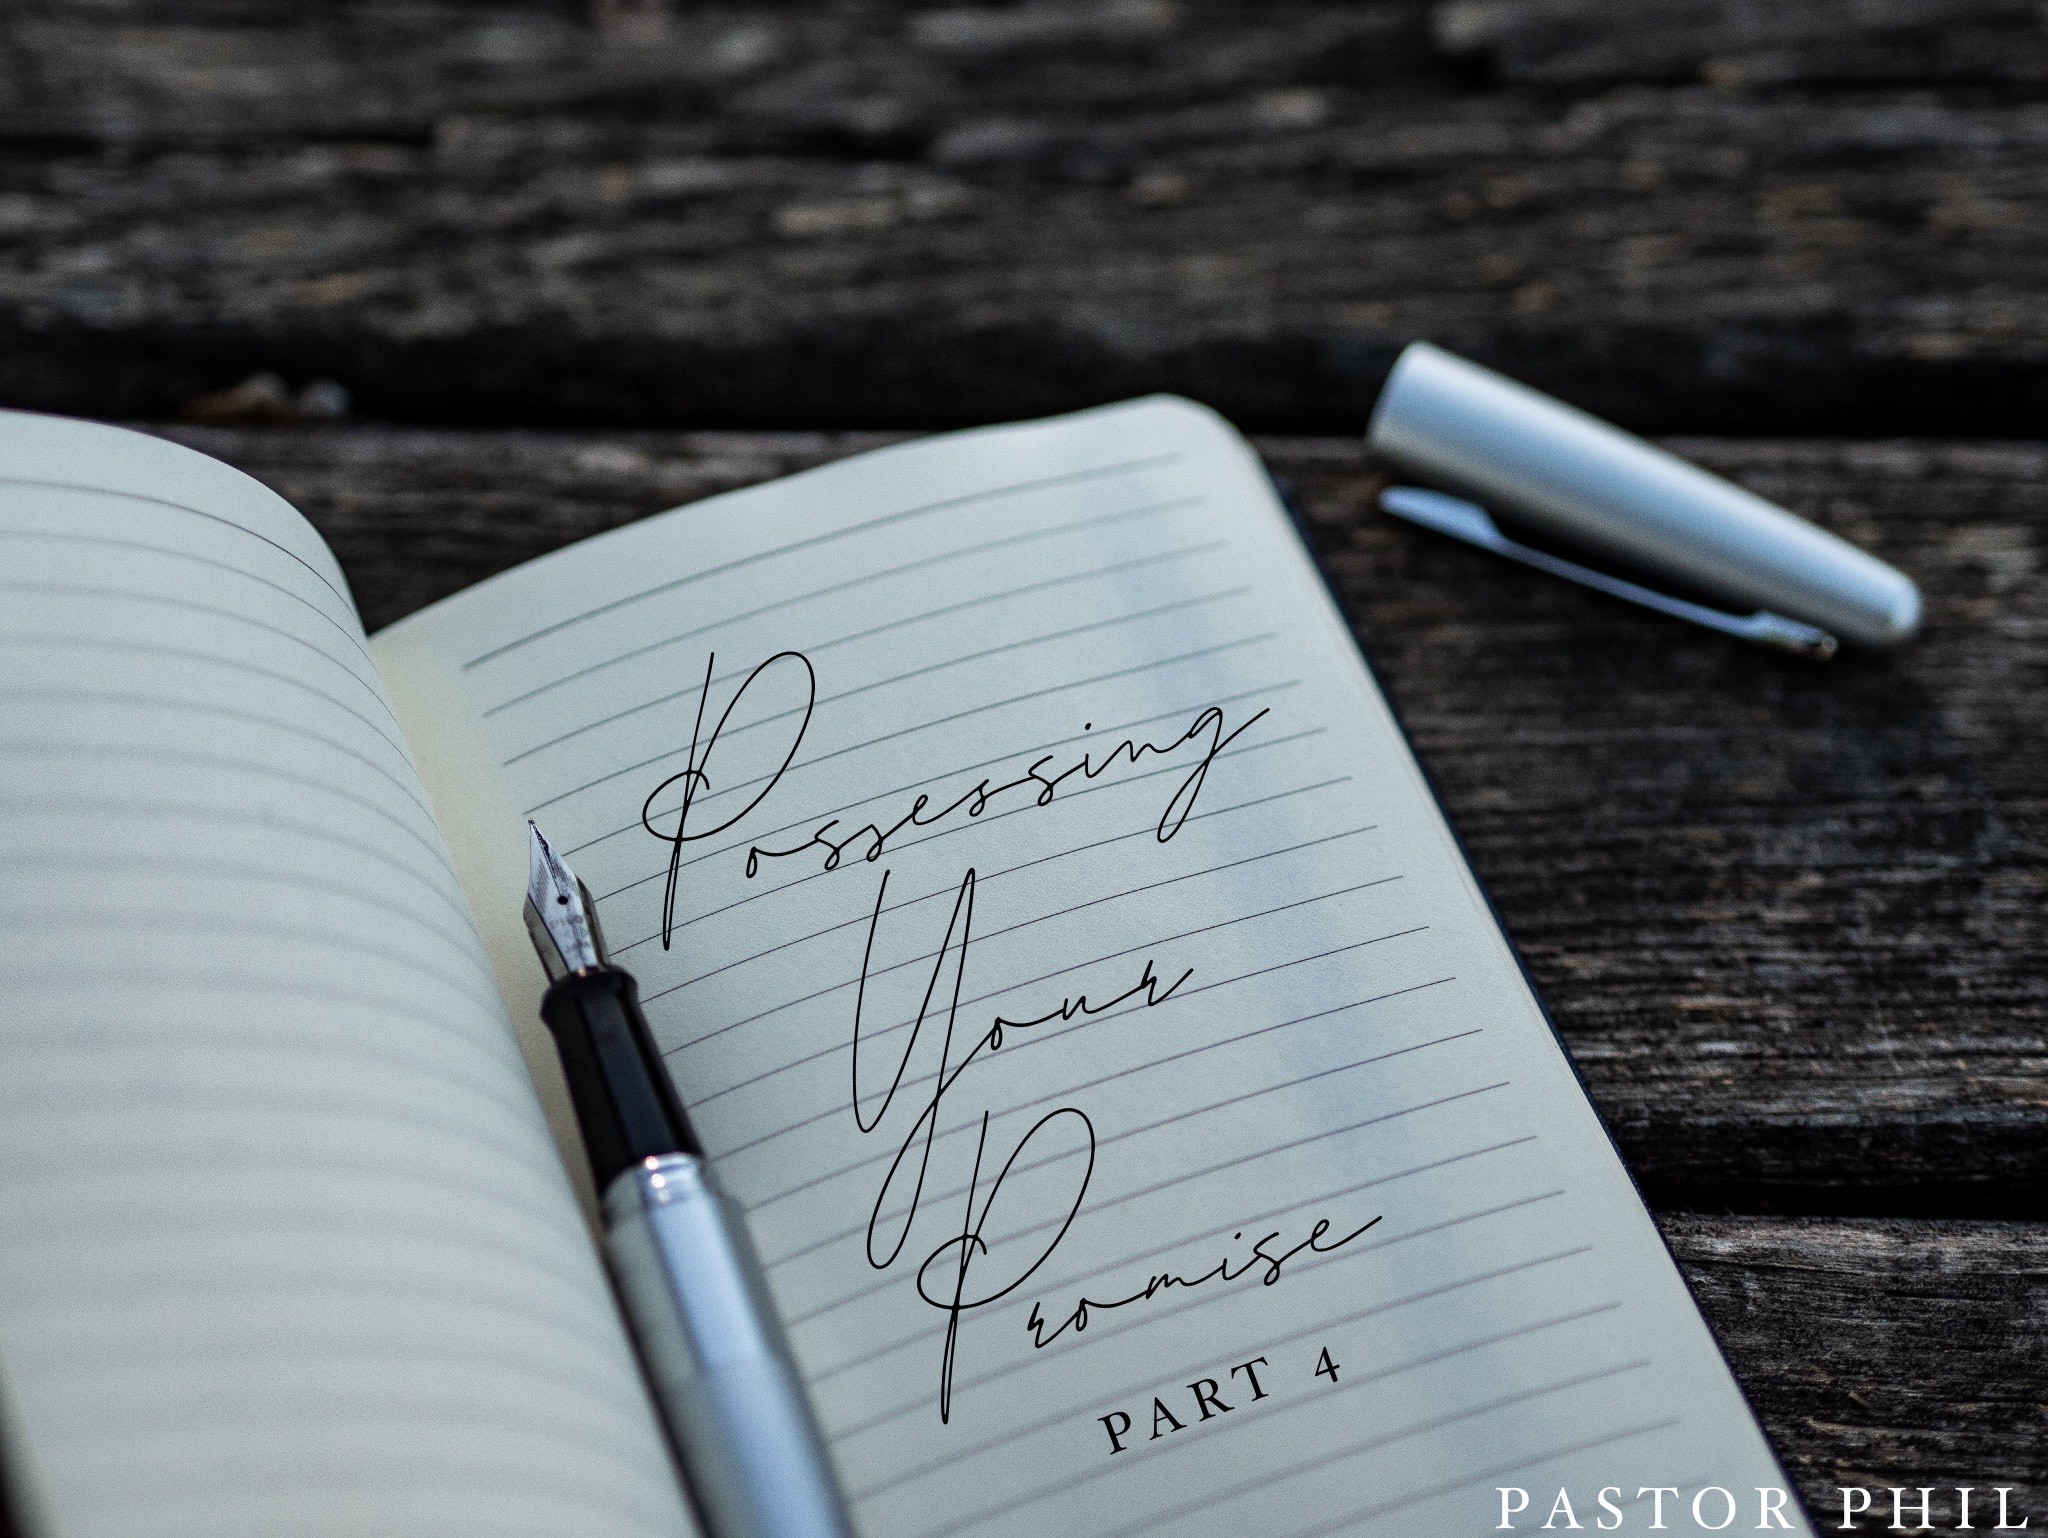 Possessing Your Promise Part 4 (audio only)